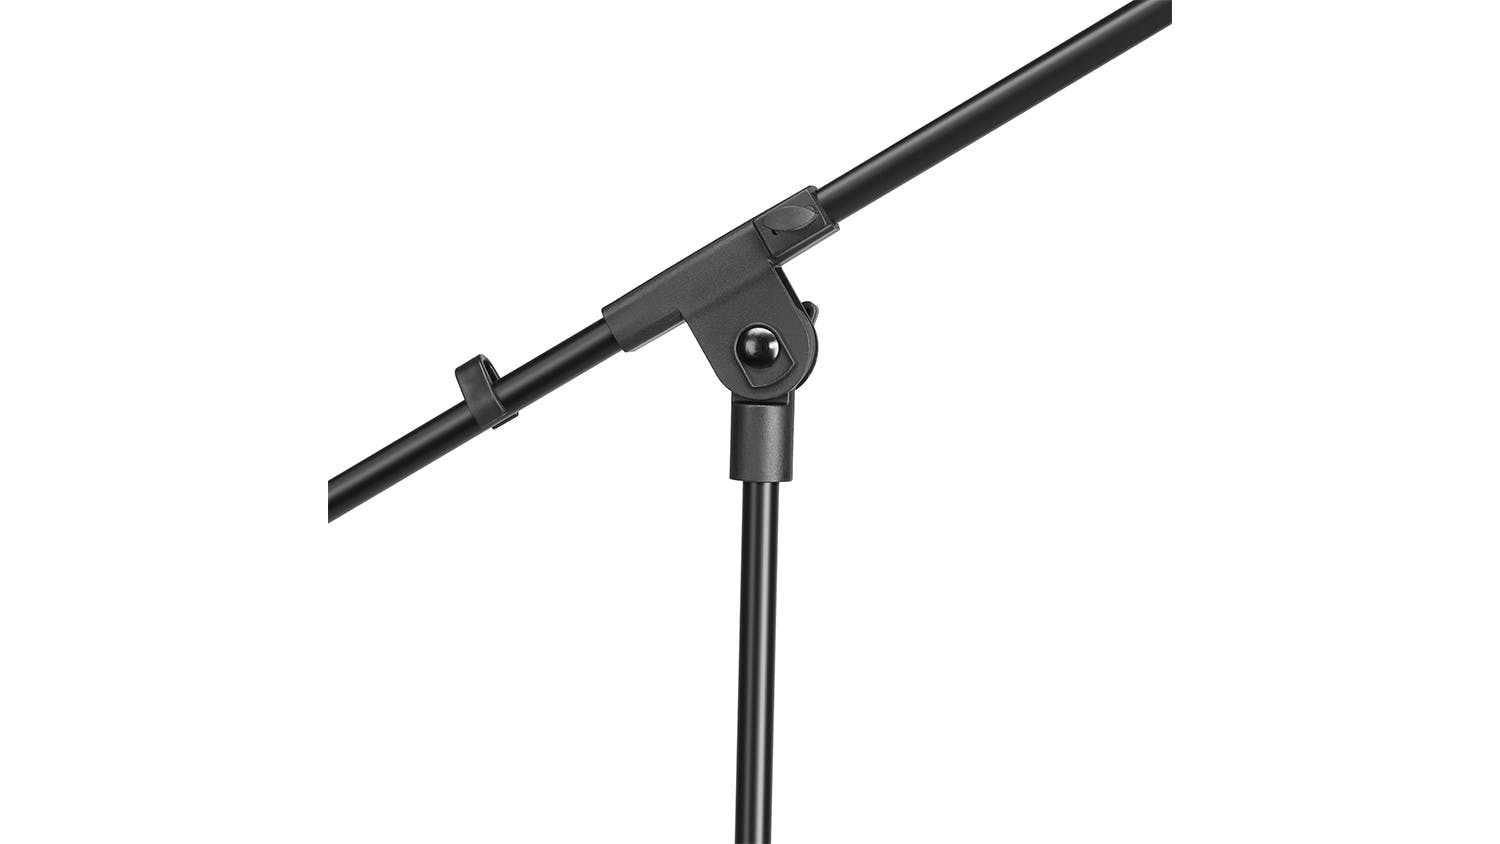 Adam Hall S5BE Microphone Stand with Boom Arm - Black